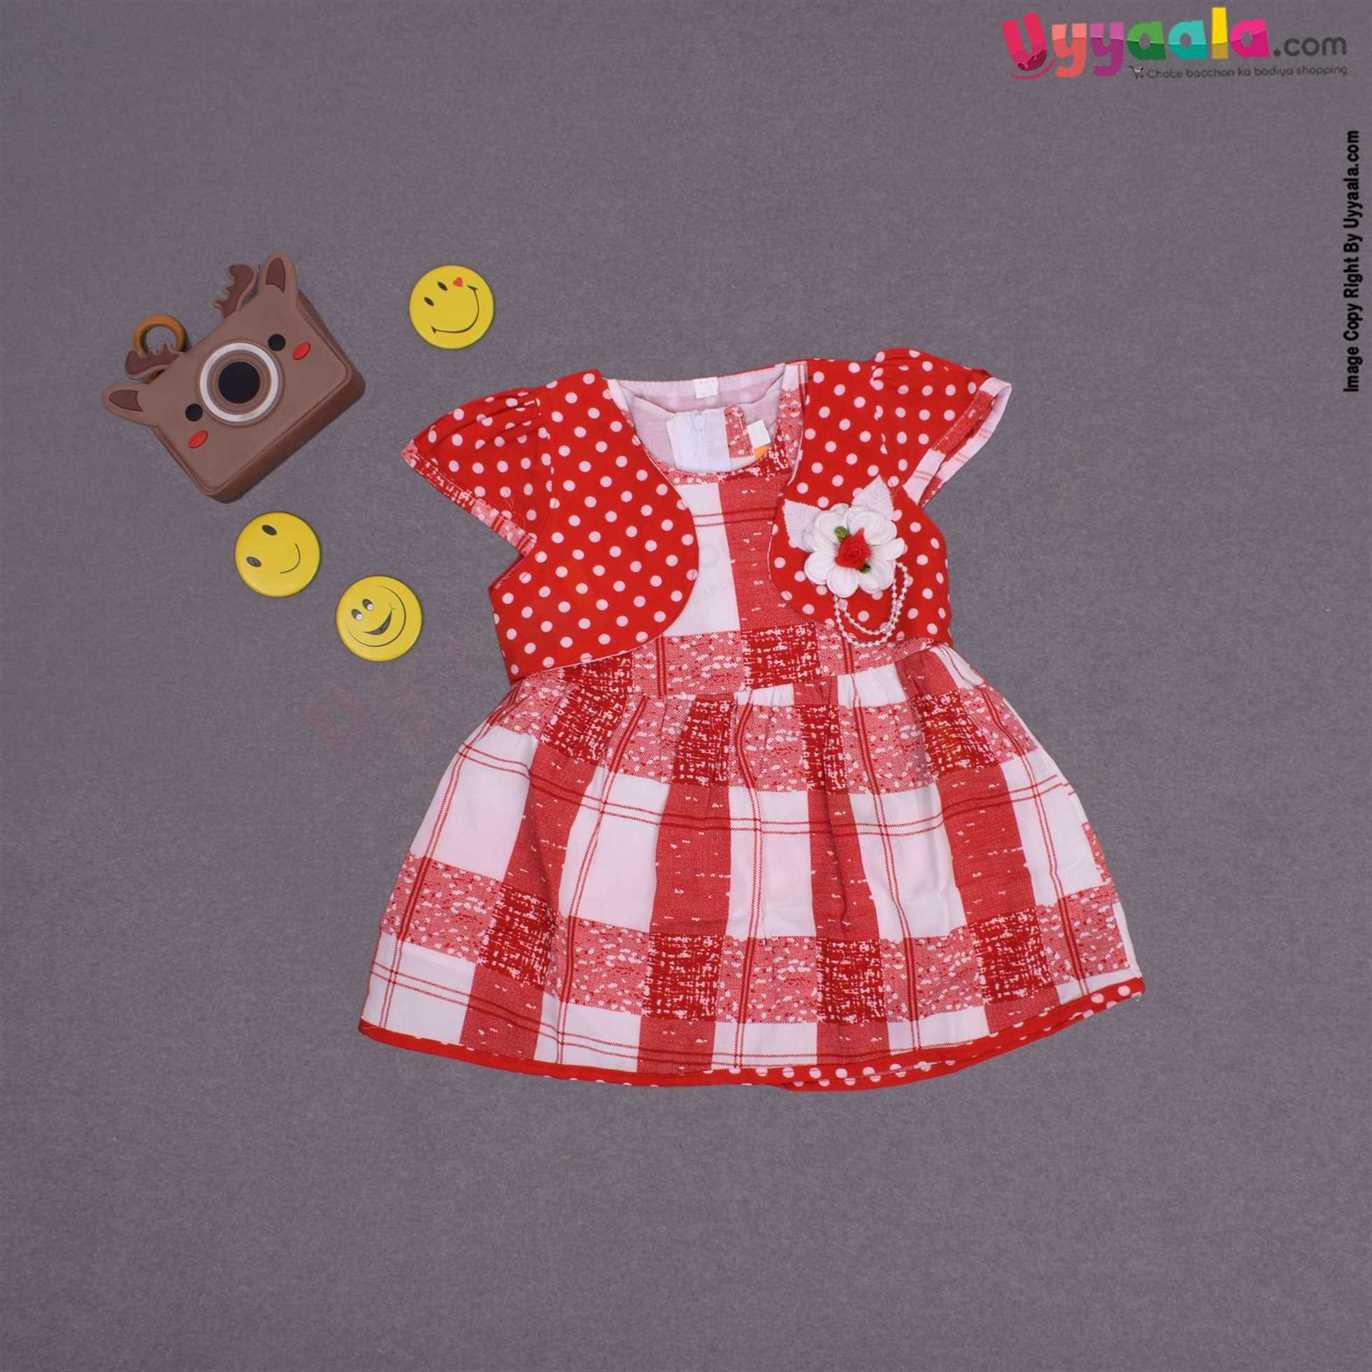 Cotton sleeveless party wear frock for baby girl